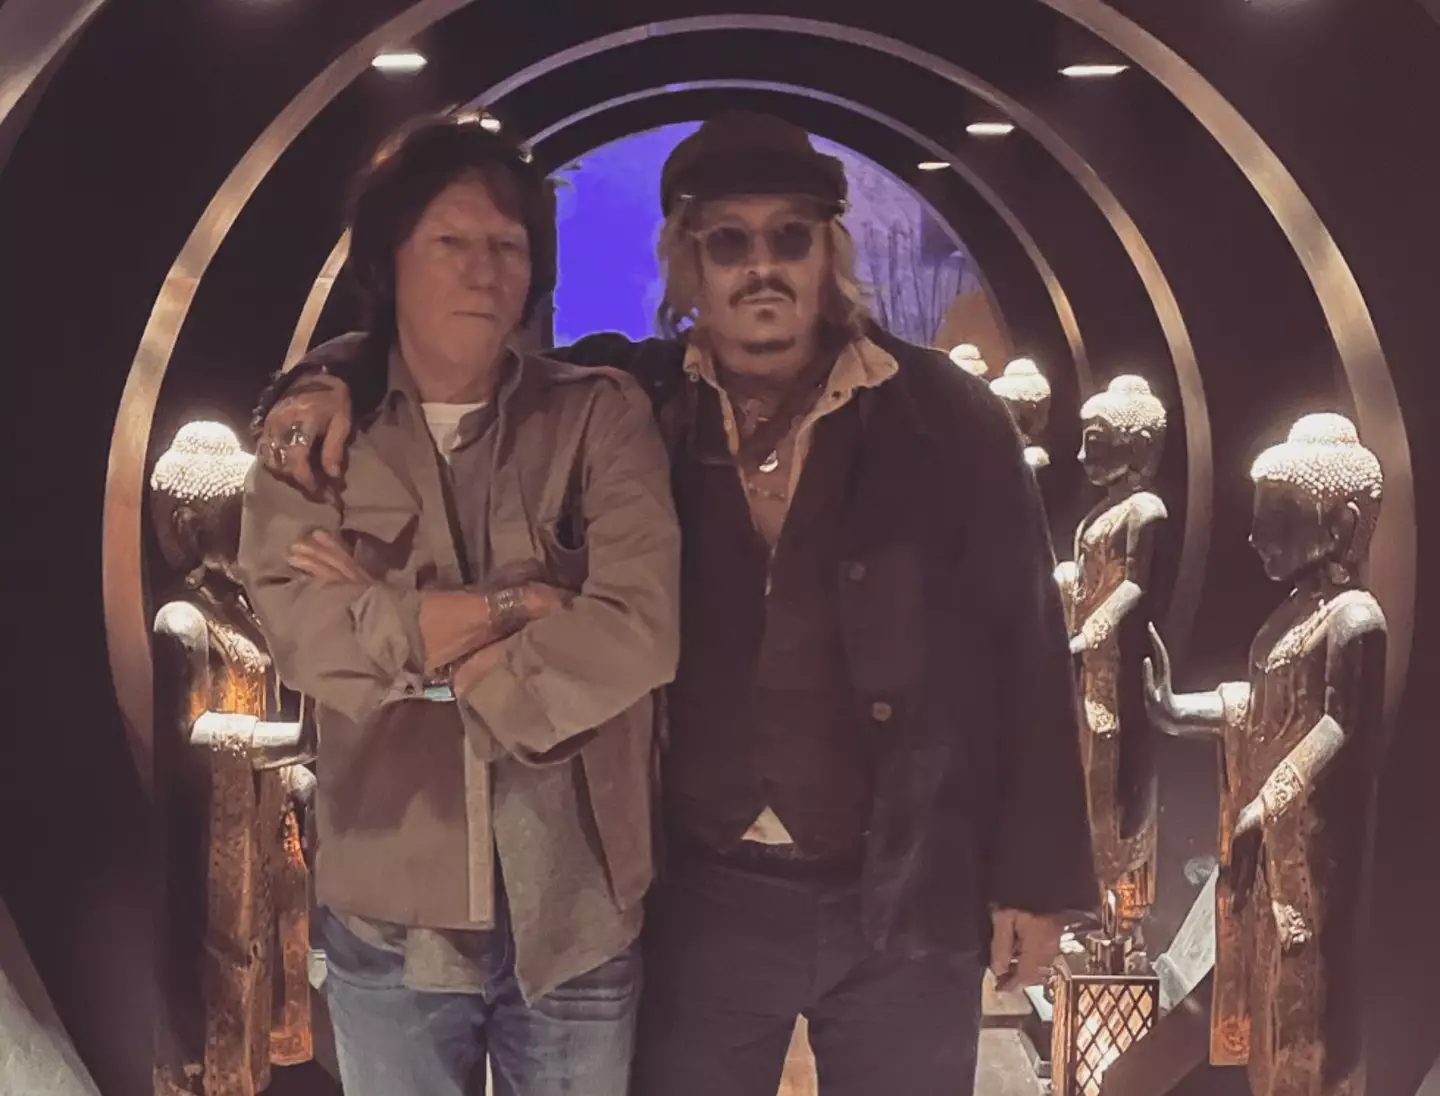 Depp and Beck visited the restaurant amid Beck's UK tour.